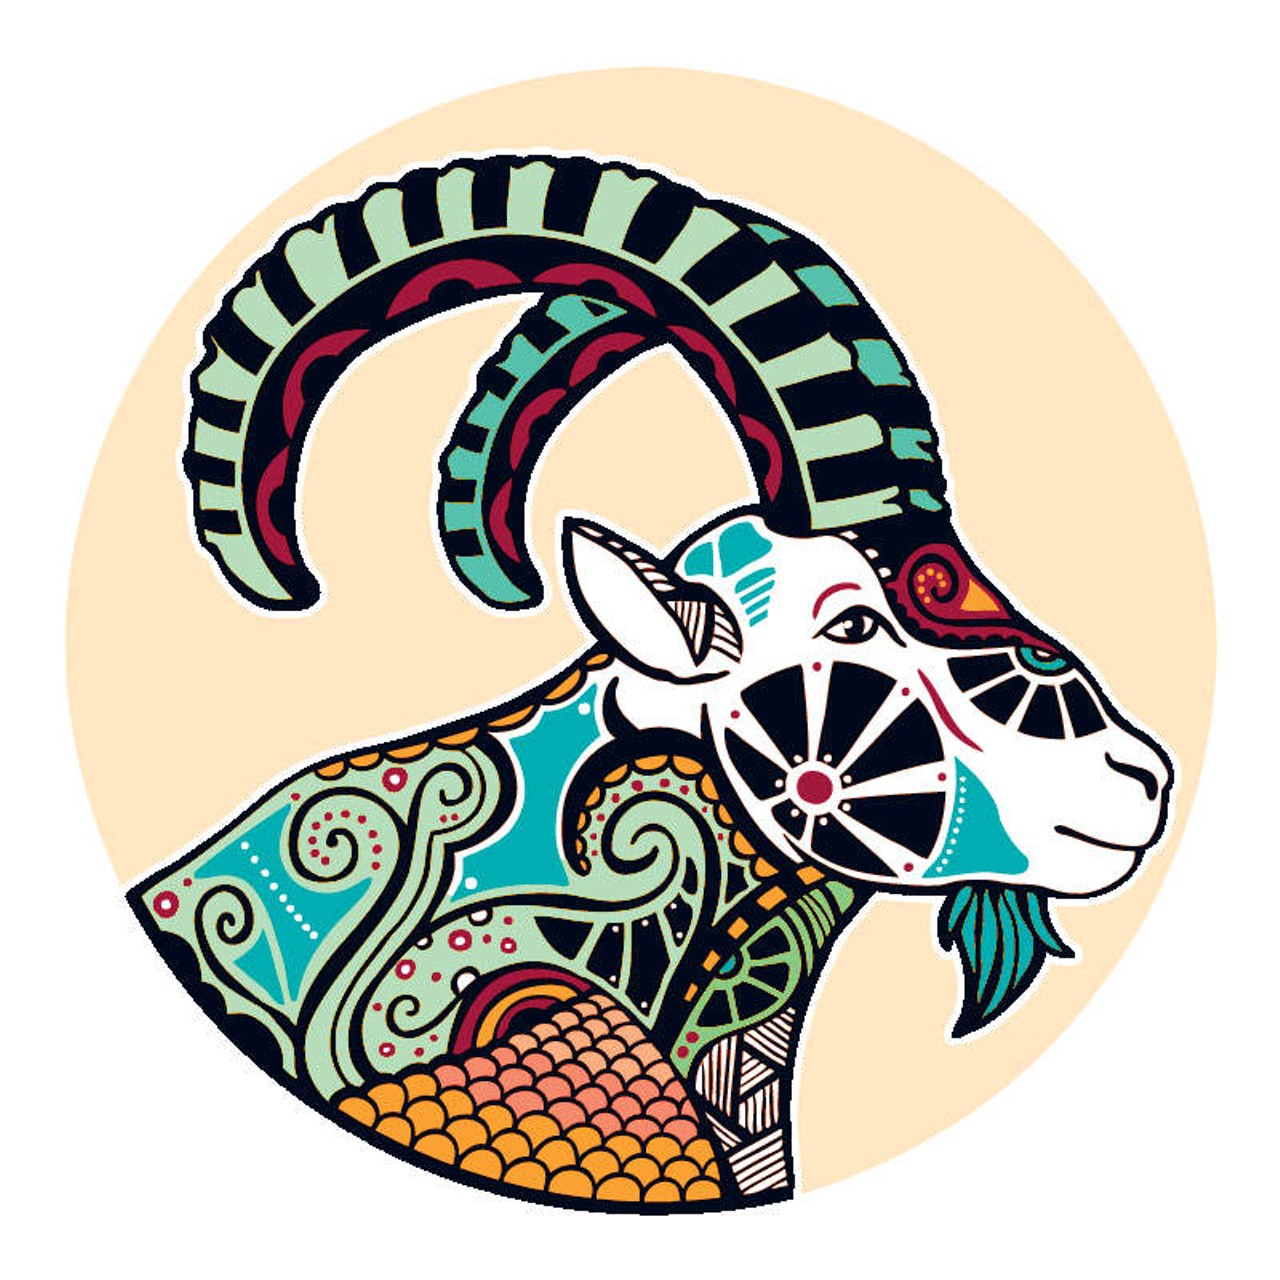 CAPRICORN: December 21 - January 20
One phase of this transformation is over. As the next stretch opens up, you're beginning to see that whatever doesn't kill us makes us stronger. In a few months you will be on your way up. Any sense of fear or trepidation has to do with the fact that you've been up against it for the last four years and you've got no reason to expect that anything is going to be easy. Life ebbs and flows and for the time being, whatever the past has taught you is your reward. Keep your wits about you. Pray for the wisdom to see through those who arrive to undermine you and/or, your plans.